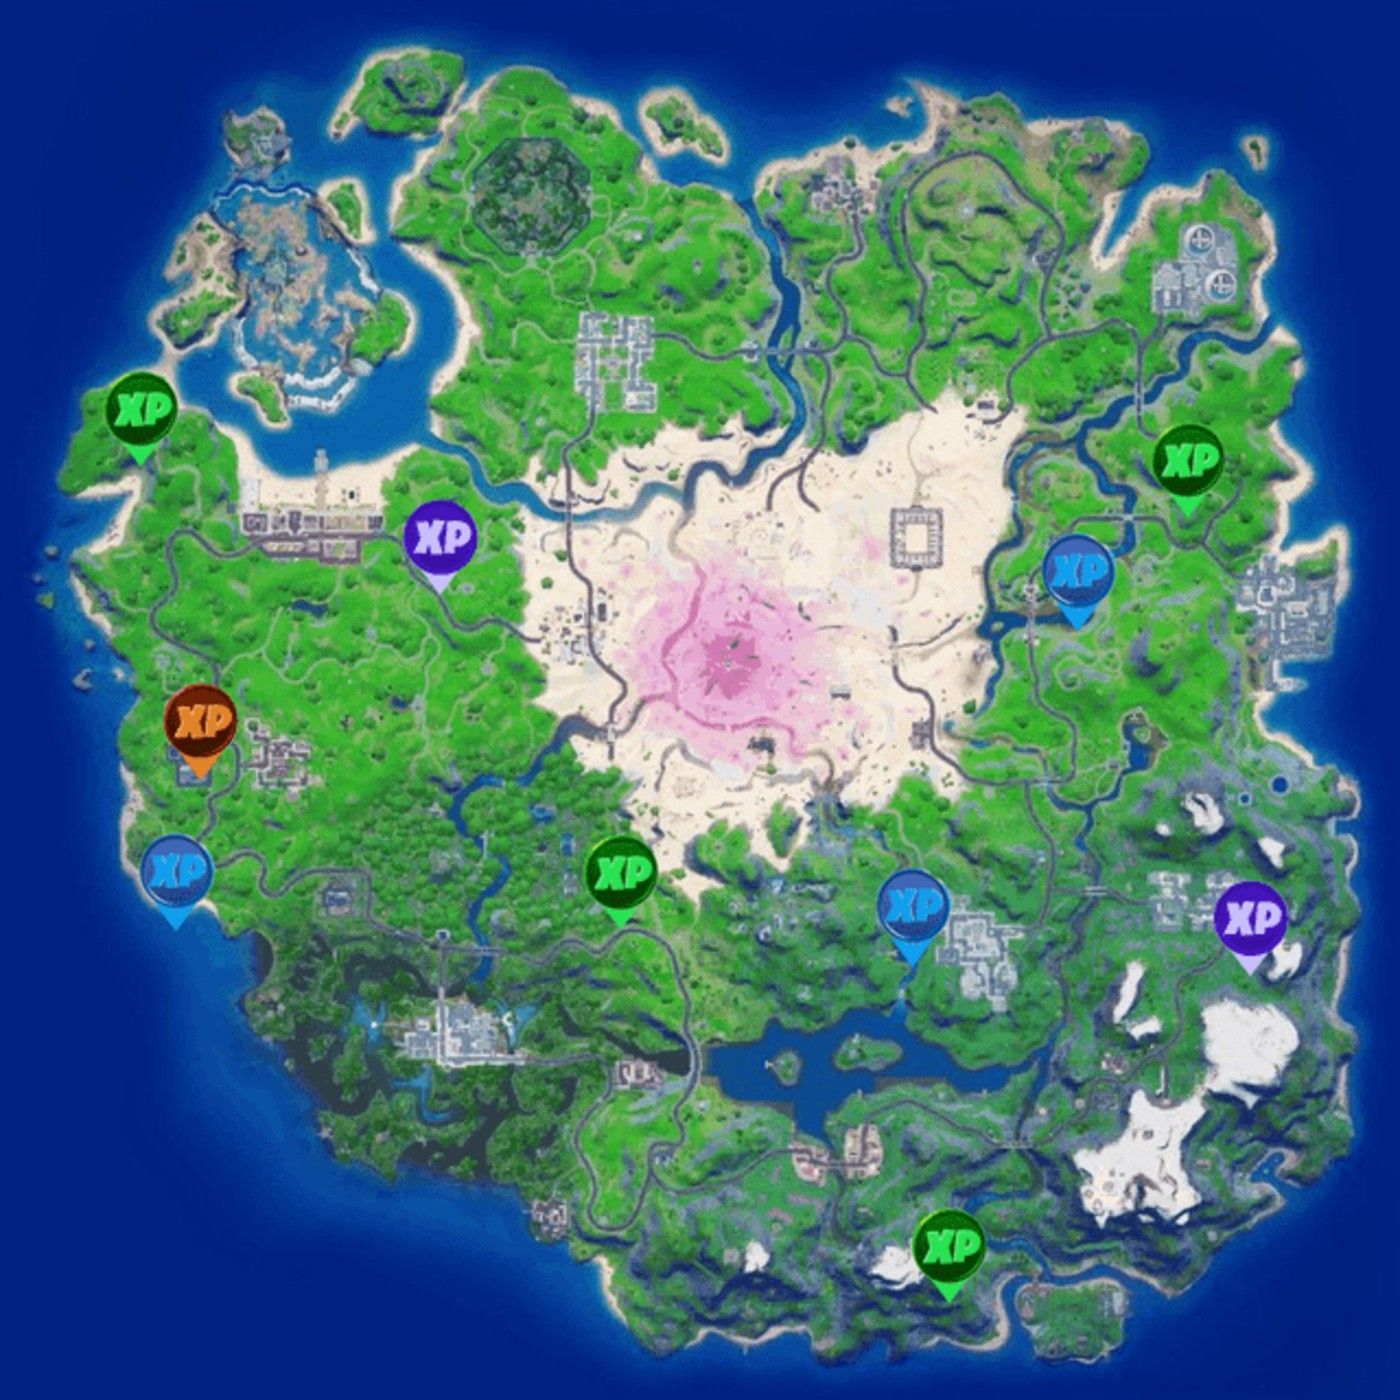 Map locations for all 10 Week 11 XP Coins in Fortnite Season 5